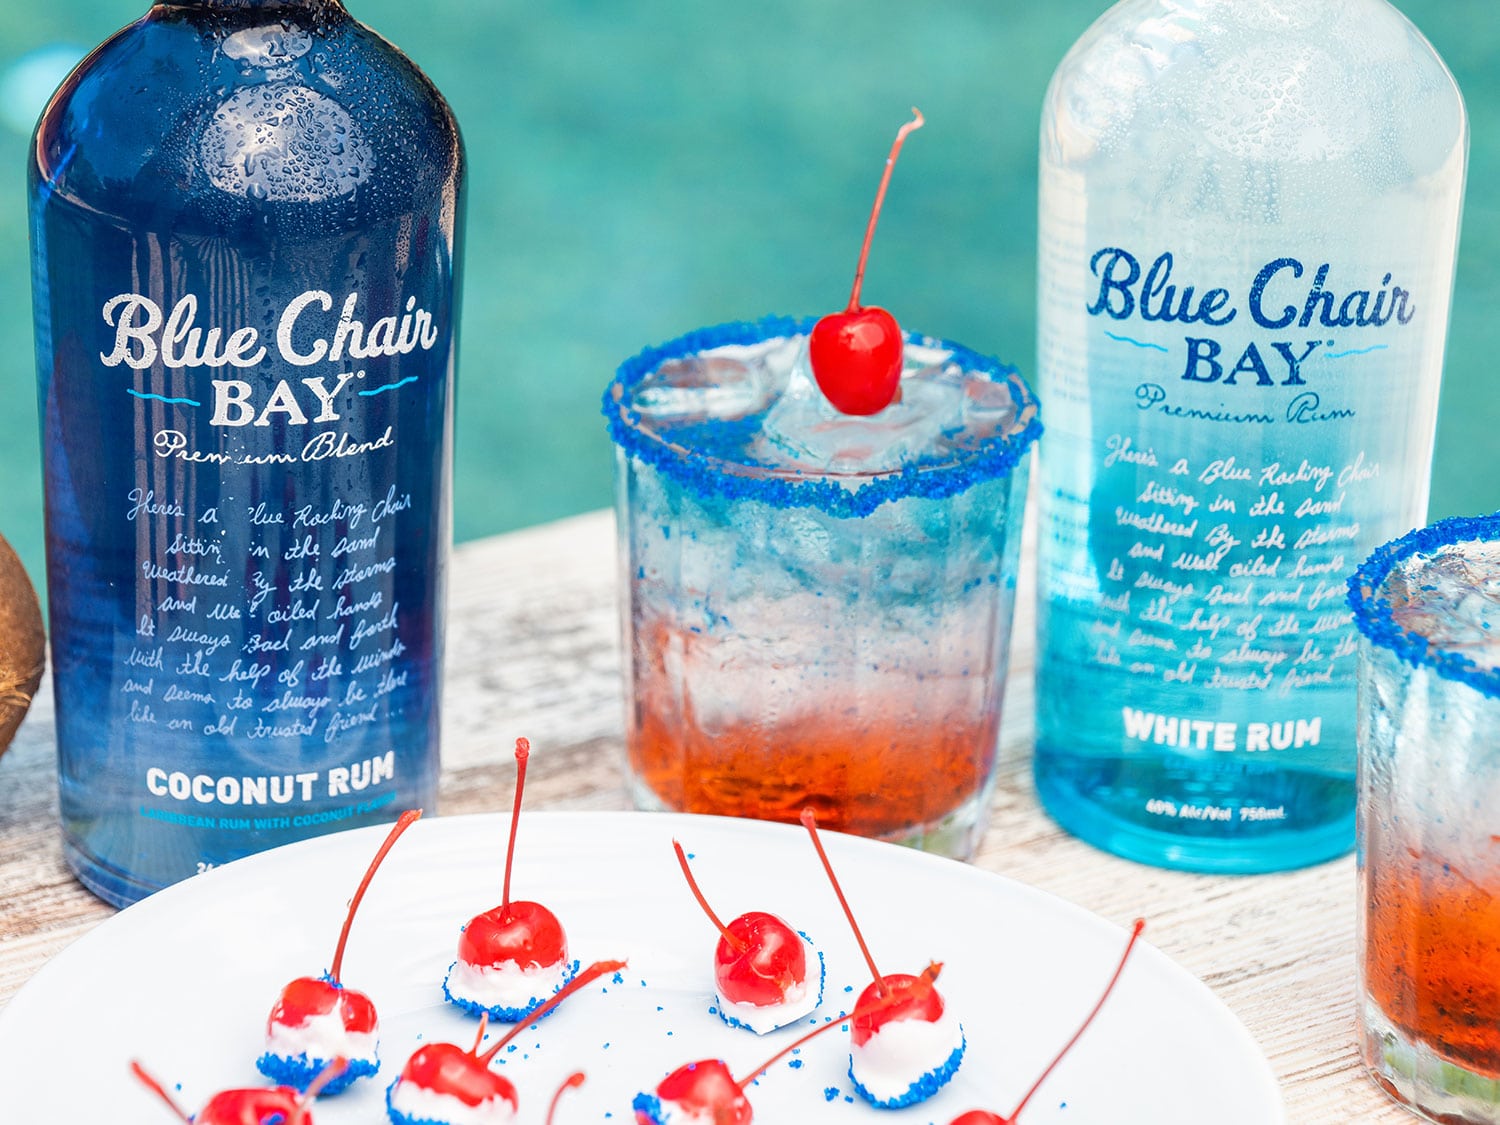 A red, white, and blue cocktail on a table with Blue Chair Bay cocktails.